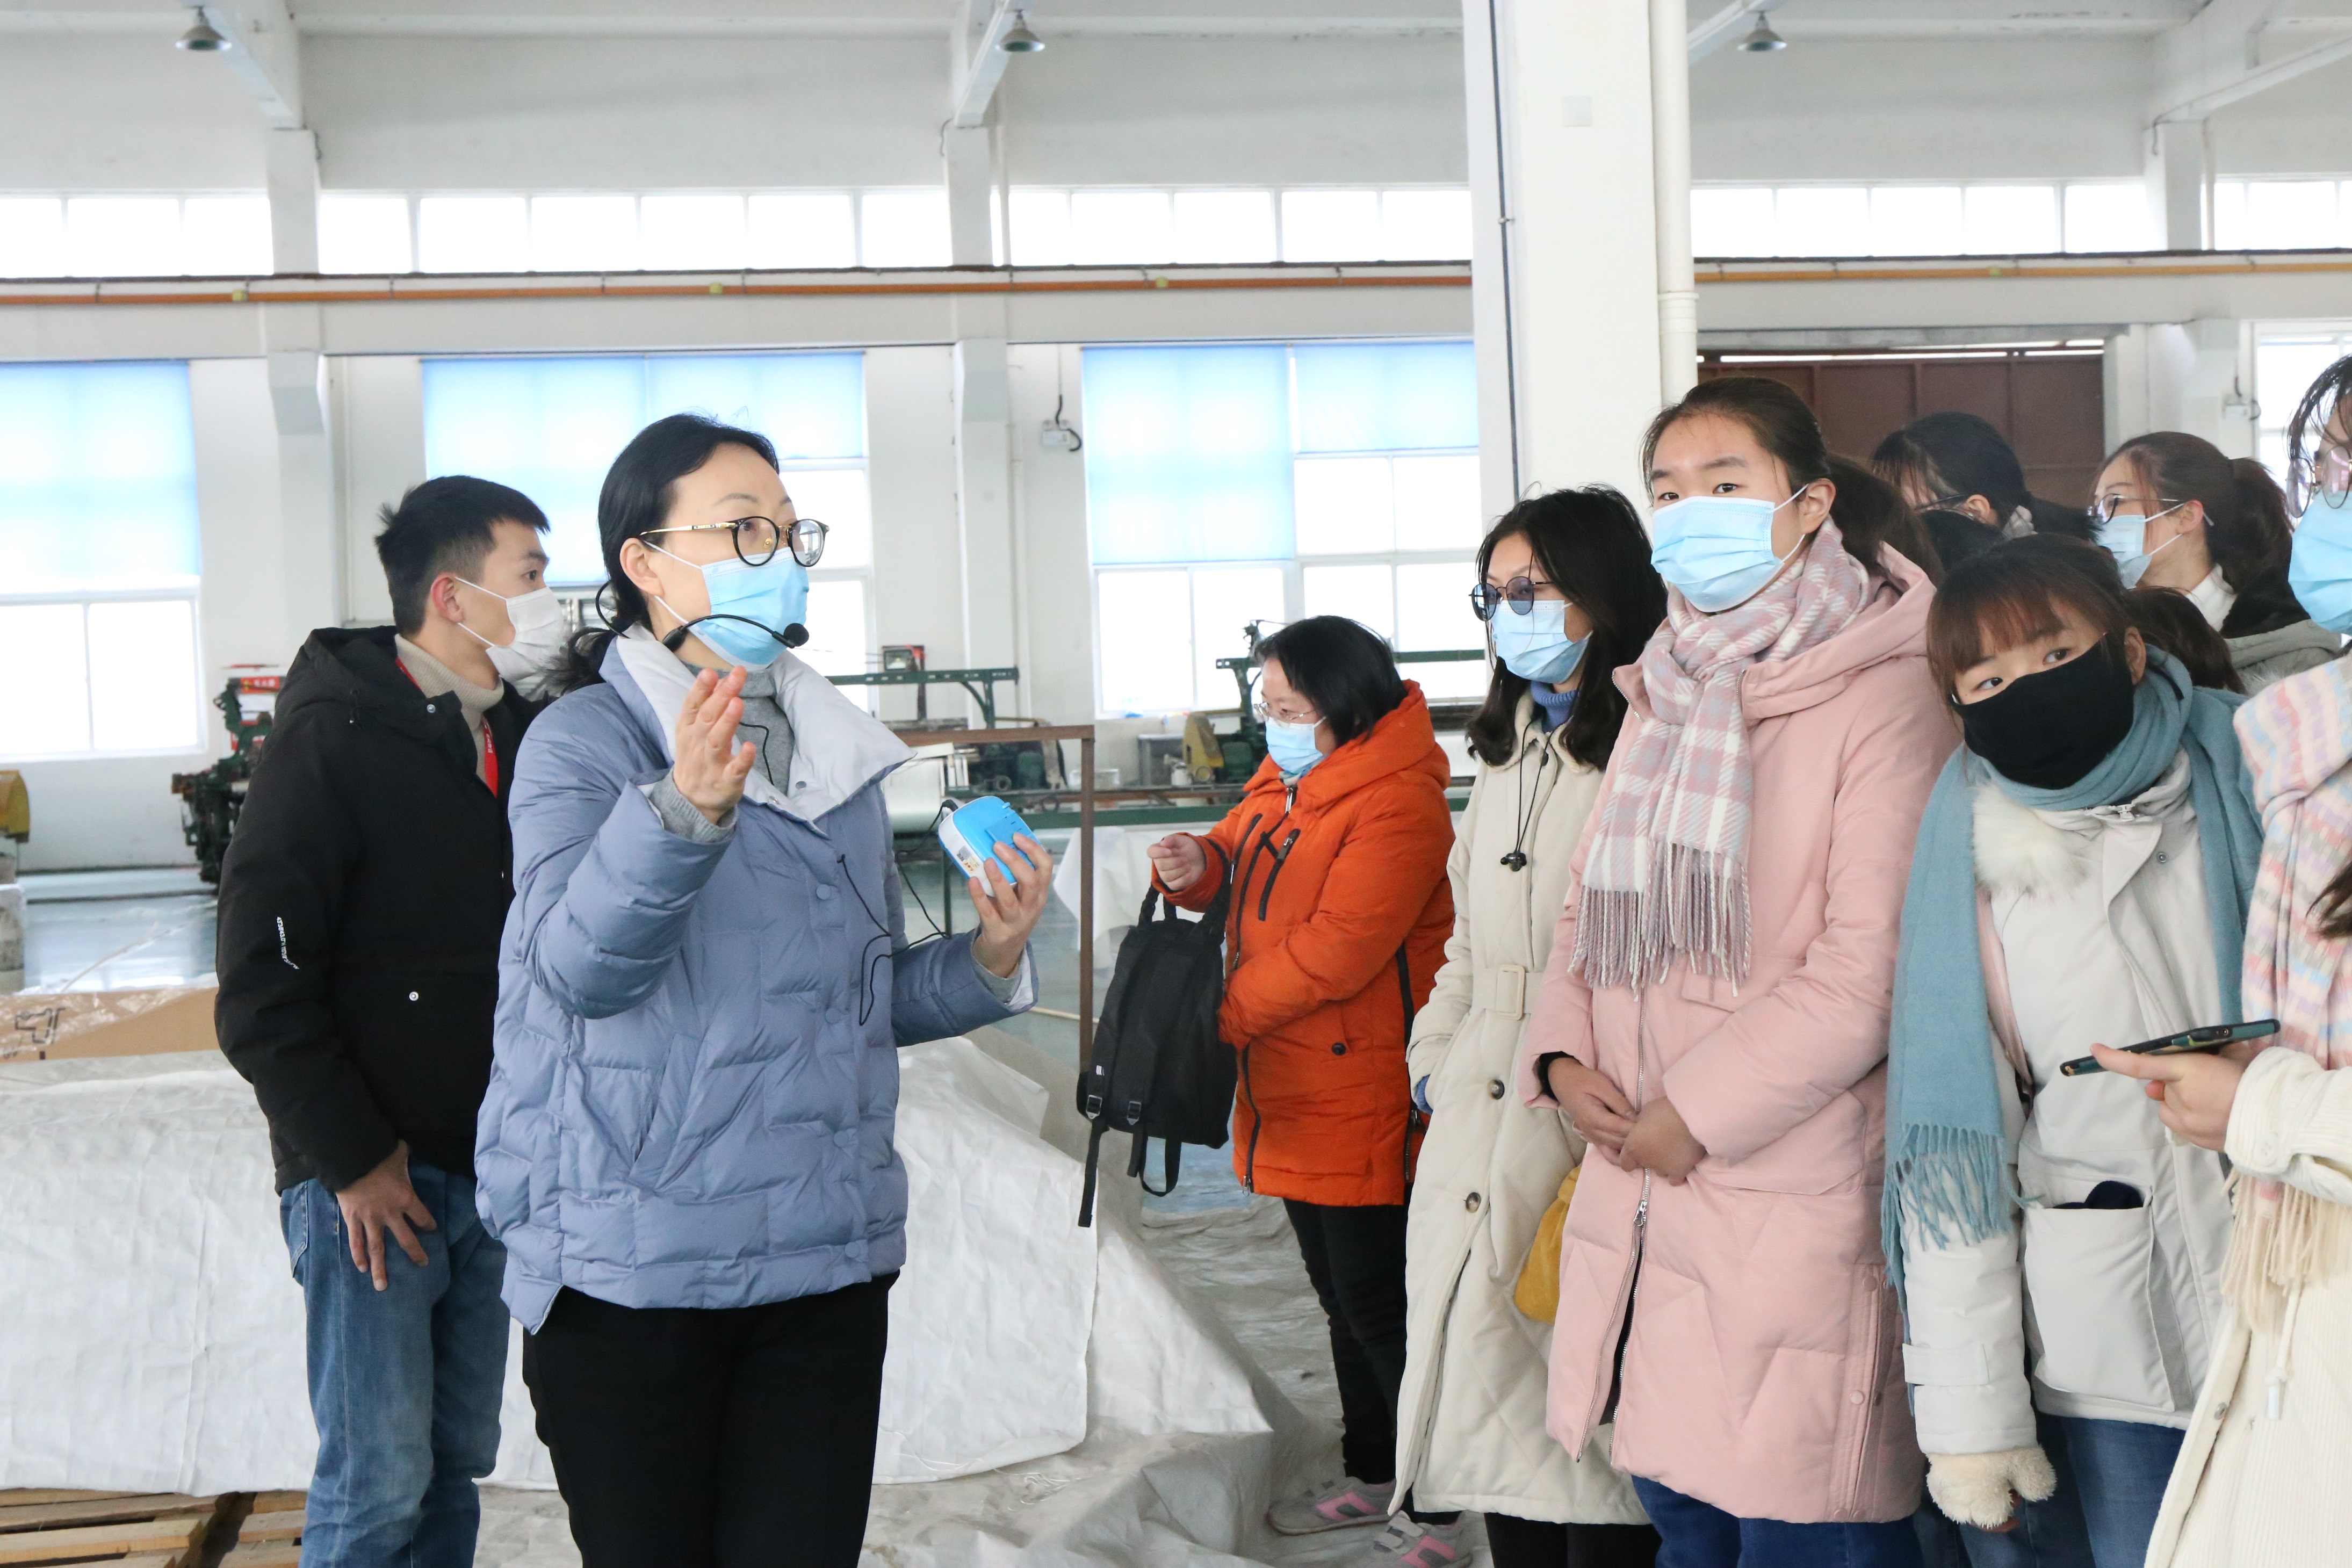 Warmly welcome Nanjing Normal University Taizhou College International Trade teachers and students to visit our company